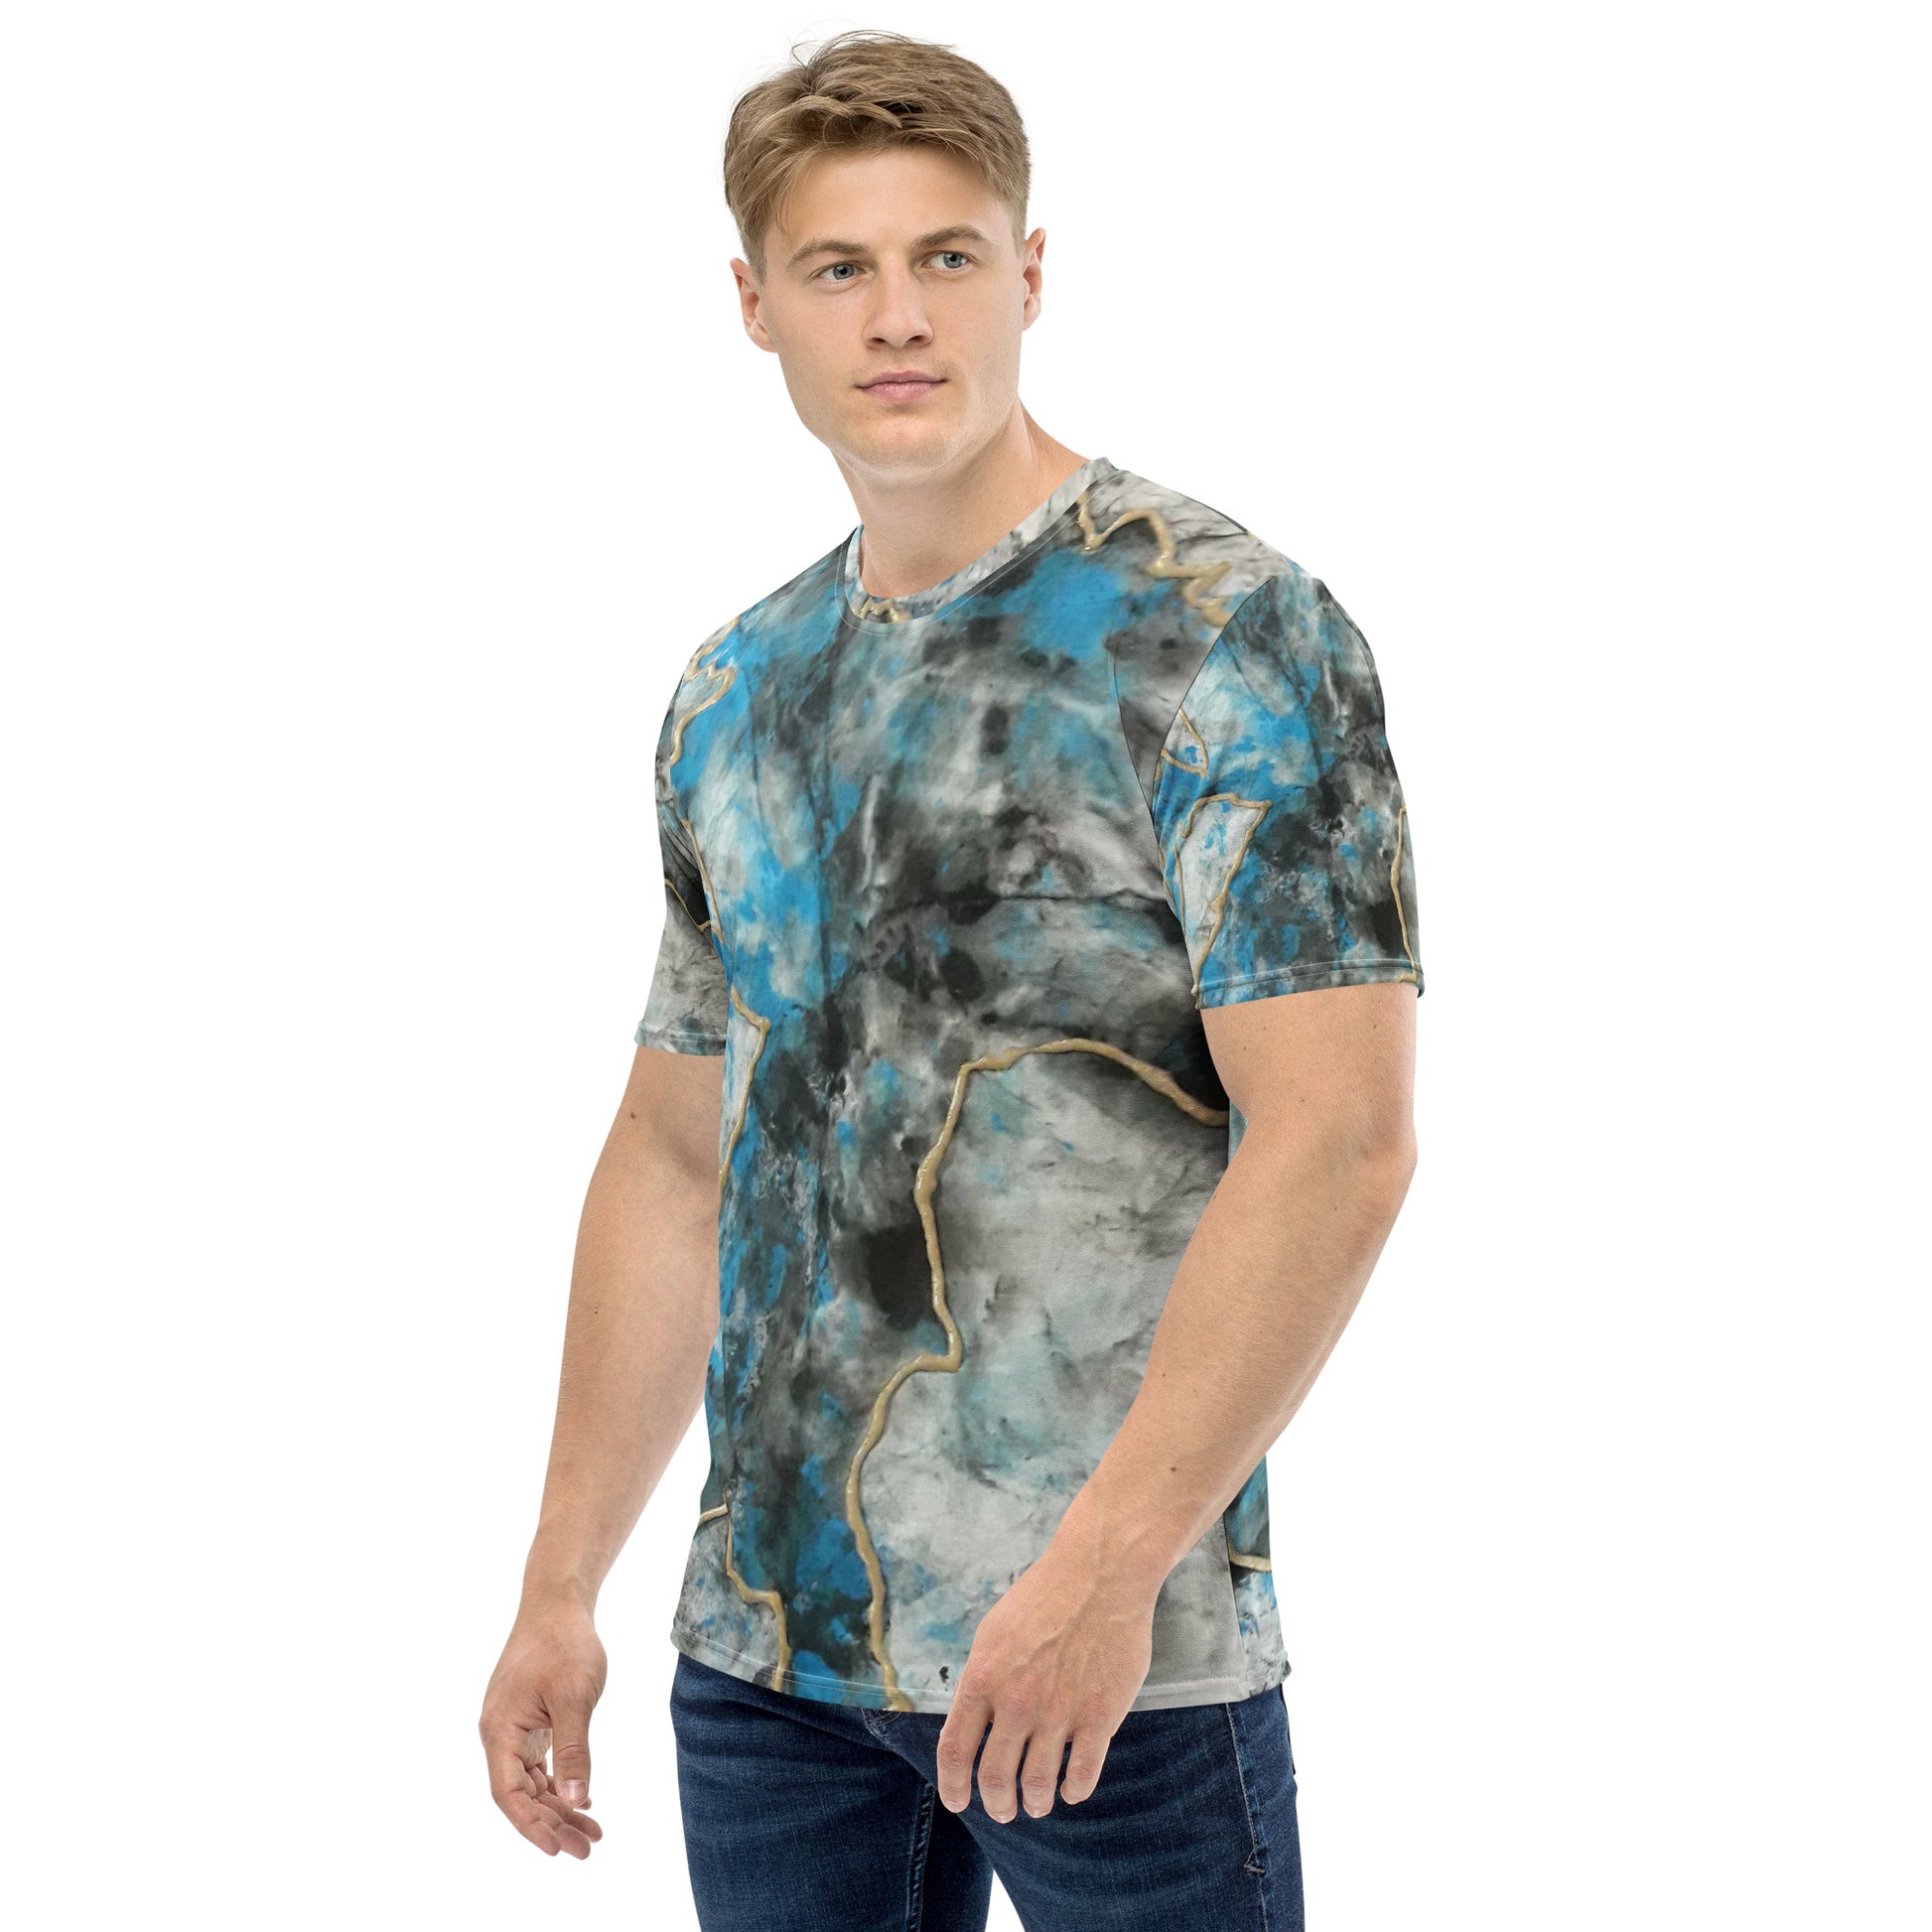 Abstract Men's T-shirt - O By Onica Online Store